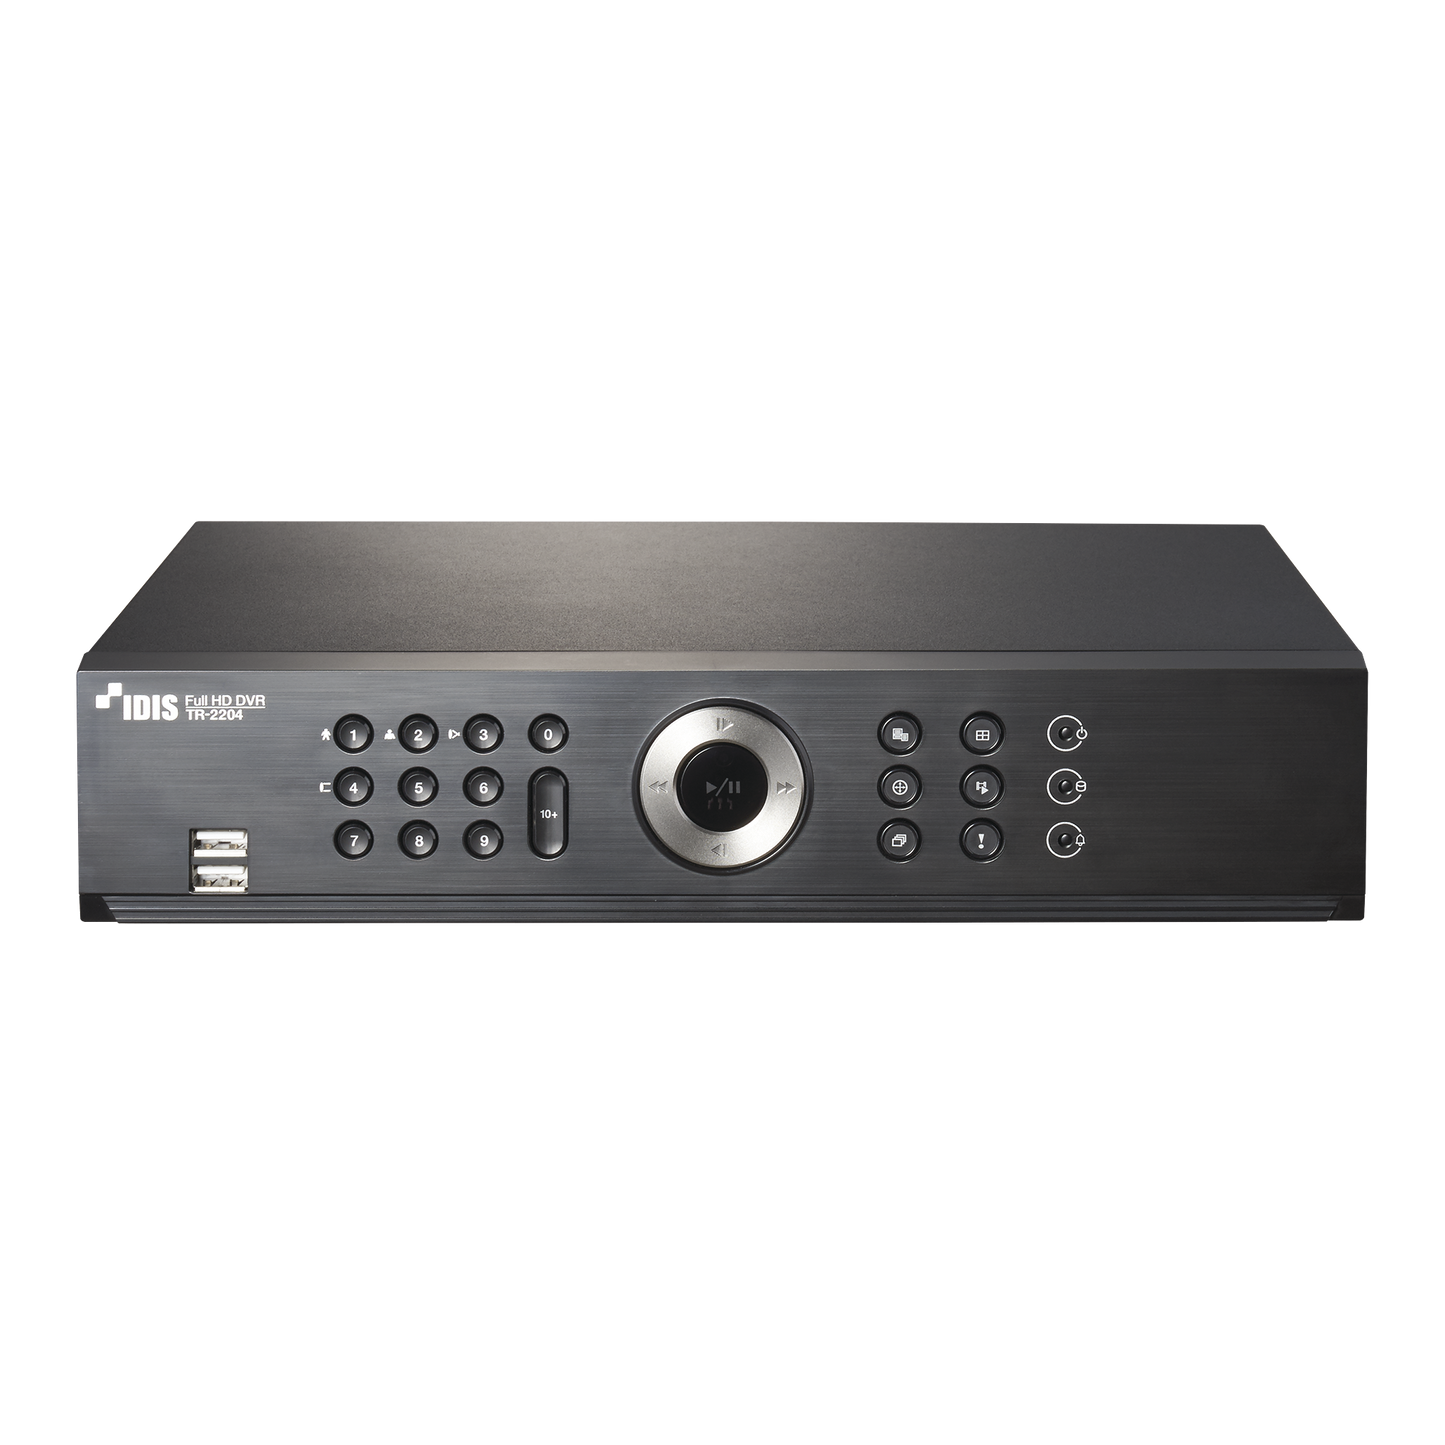 DVR 2 Megapixels | 4 Channels | Audio 4 Inputs and 1 Output | HDMI output | 4 Inputs and 1 Output Alarm | Includes 2TB HDD